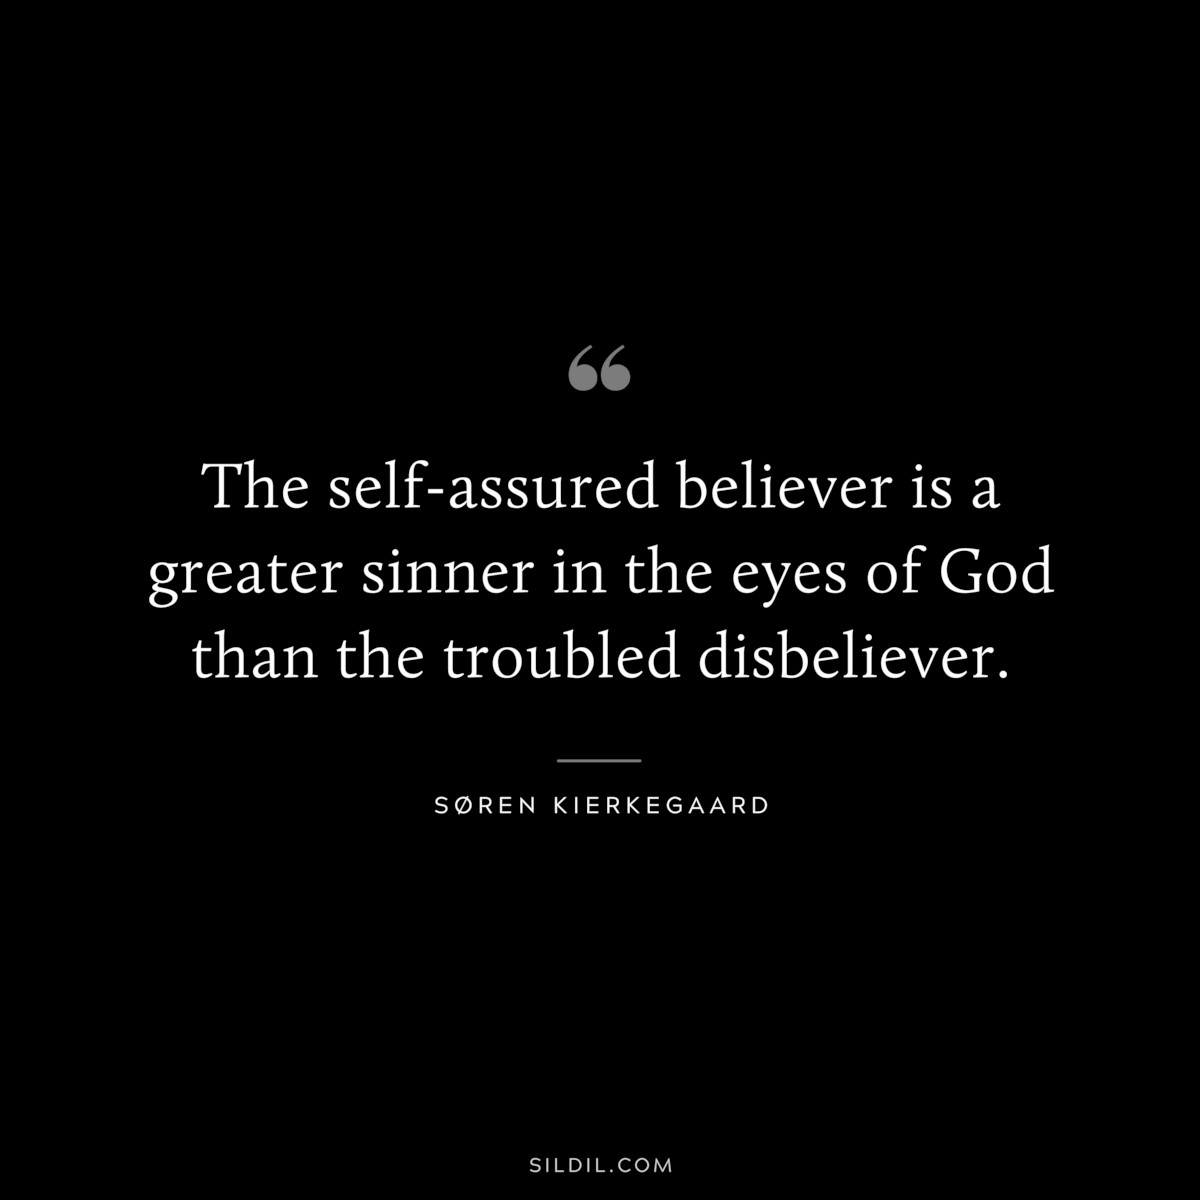 The self-assured believer is a greater sinner in the eyes of God than the troubled disbeliever. ― Søren Kierkegaard